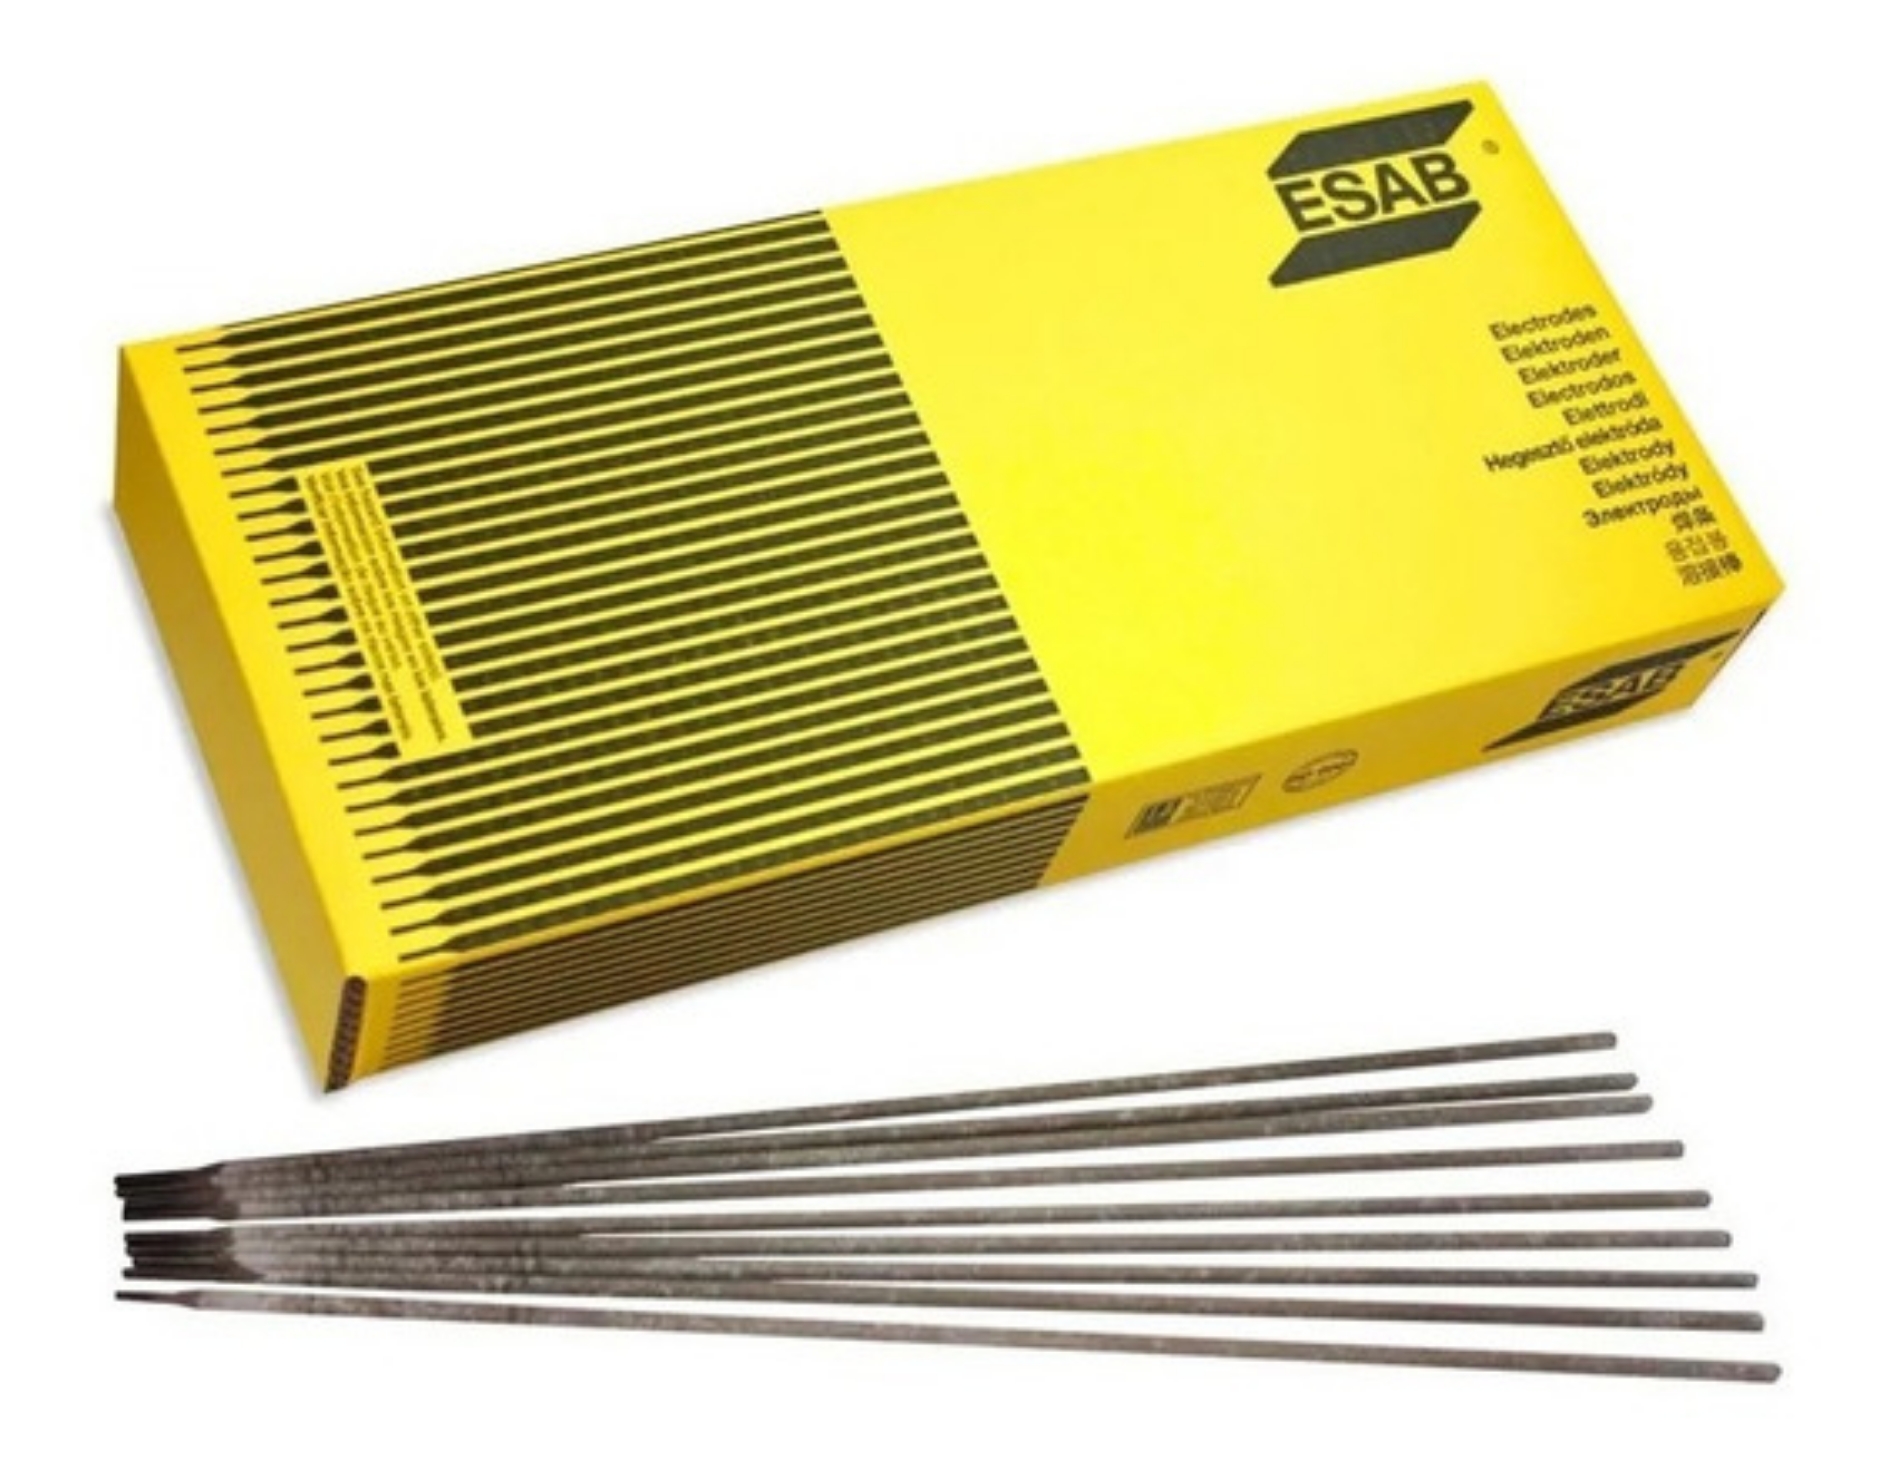 Picture of Esab E316L Electrodes OK63.30 - 1.7kg Pack (4.0 x 350mm)